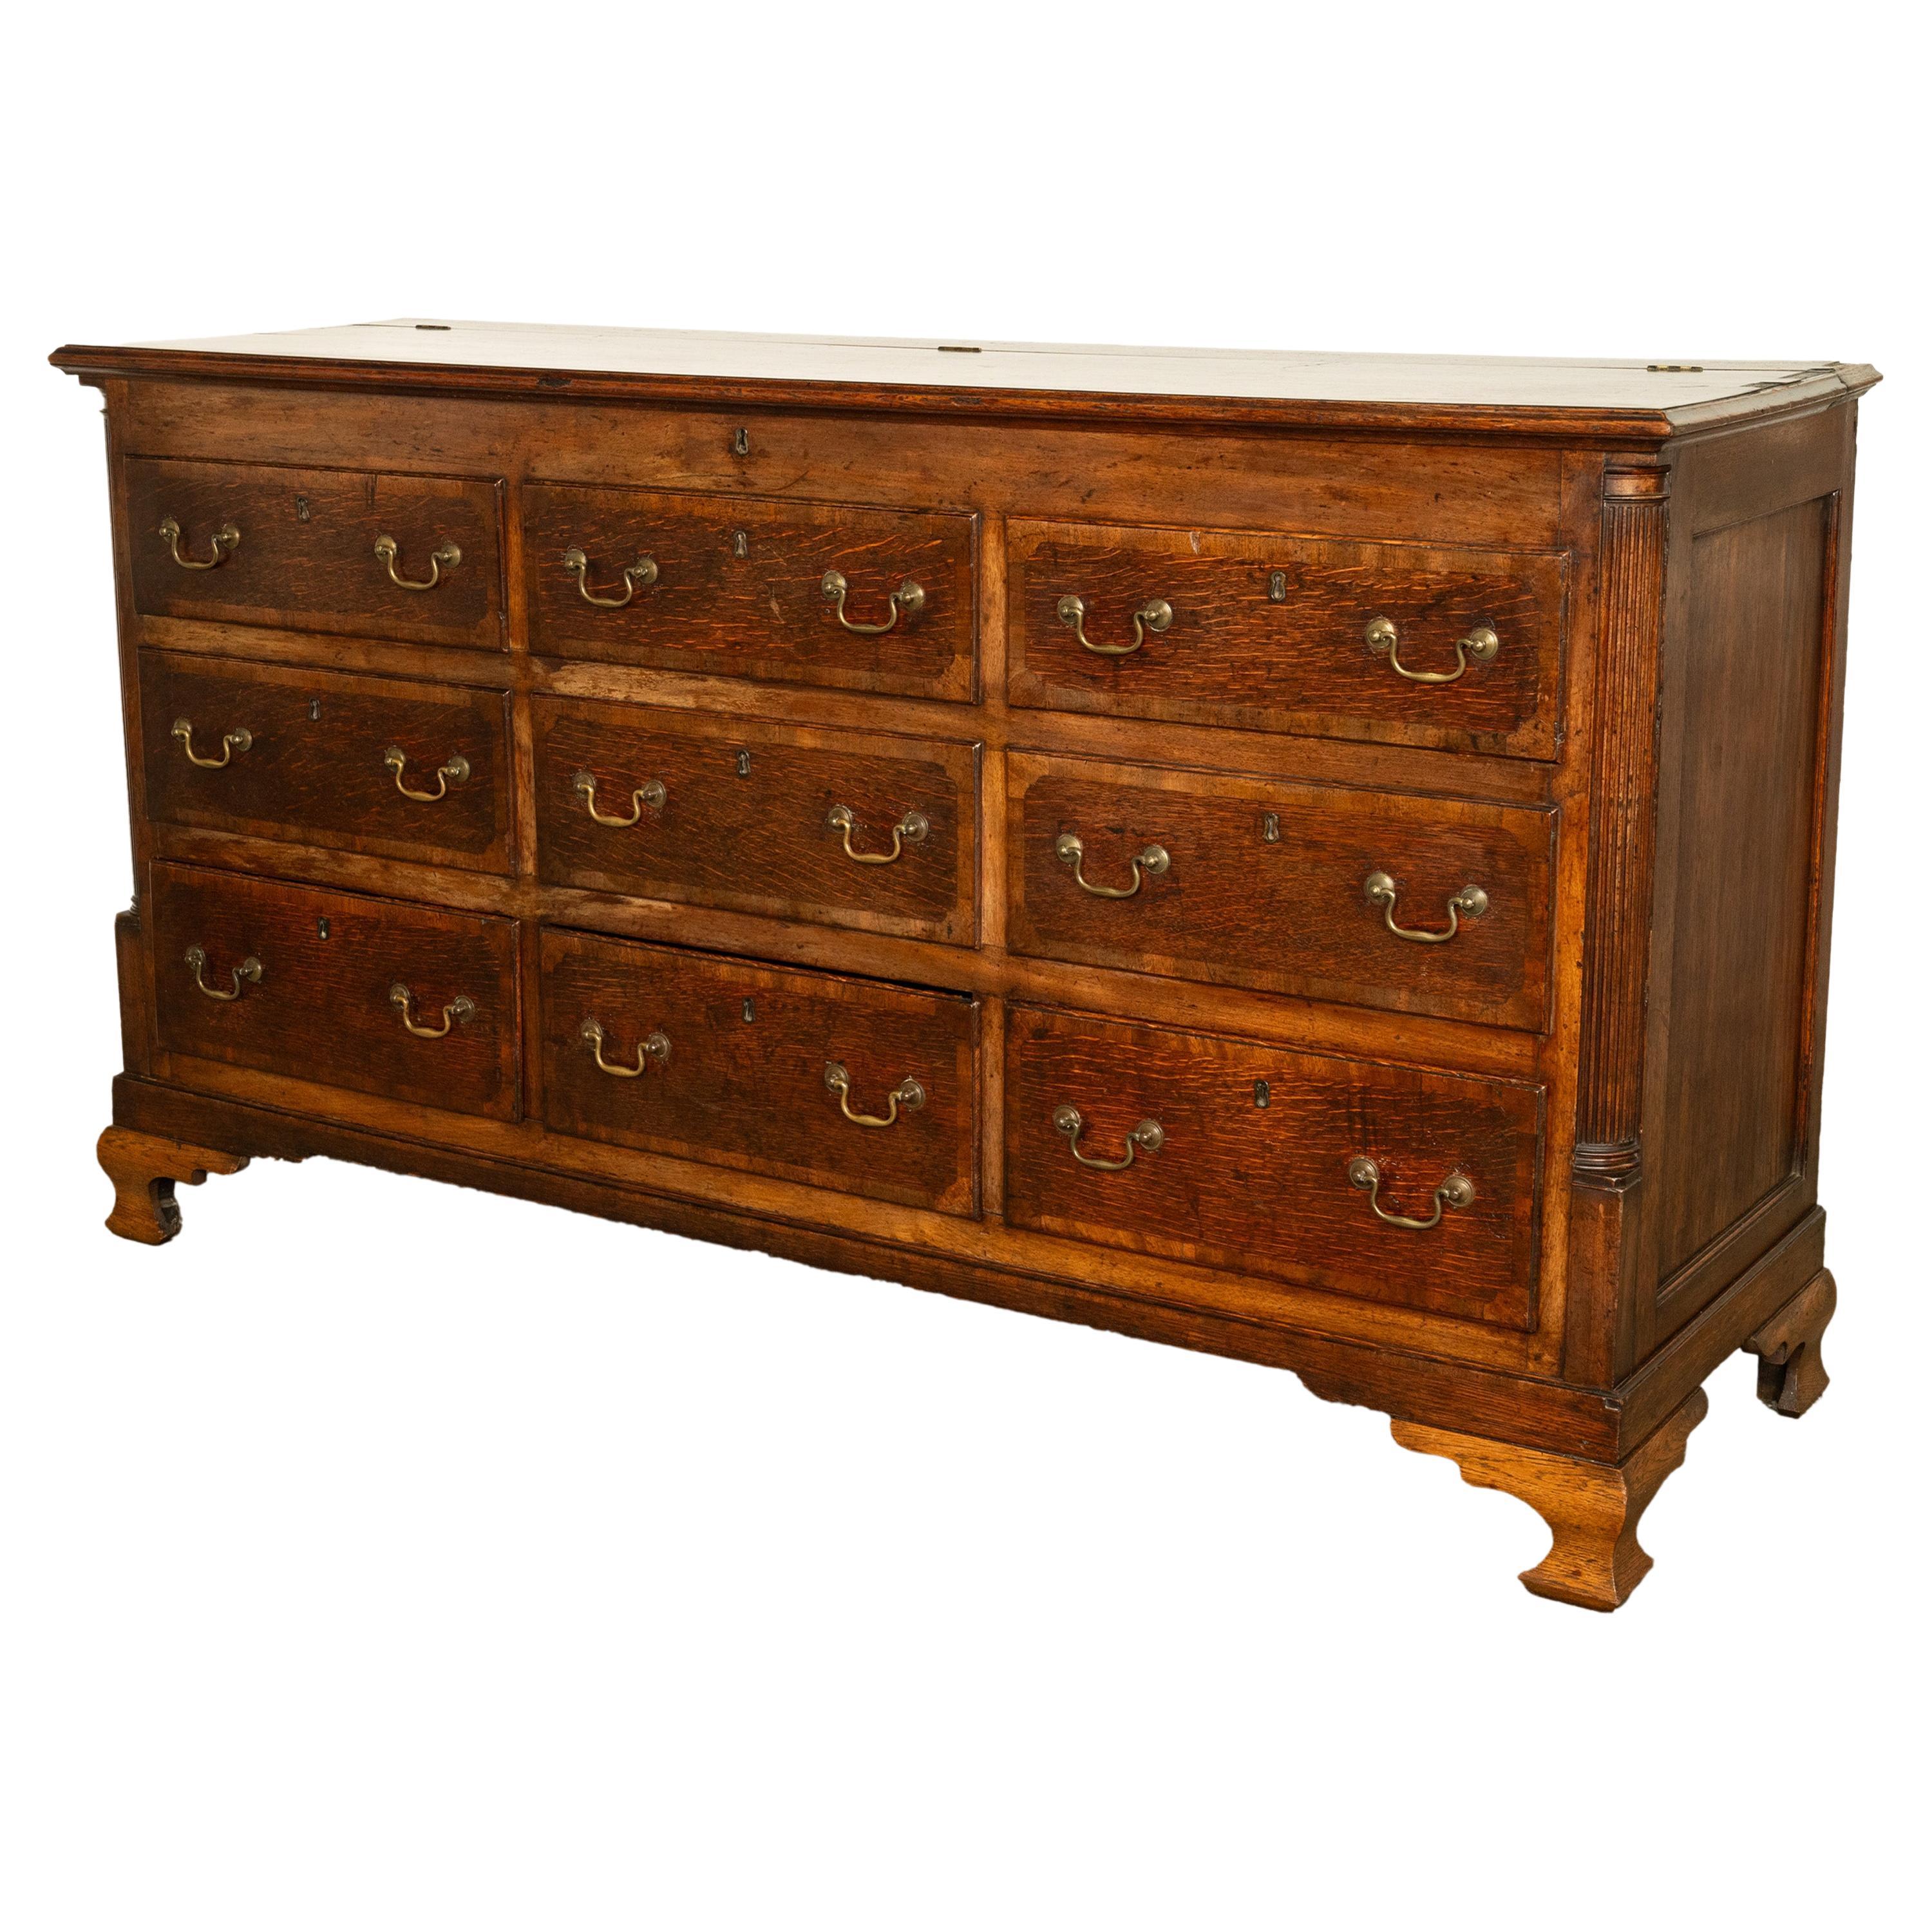 Antique 18th C Georgian Oak Mahogany Hinged Top Mule Chest Coffer Sideboard 1770 For Sale